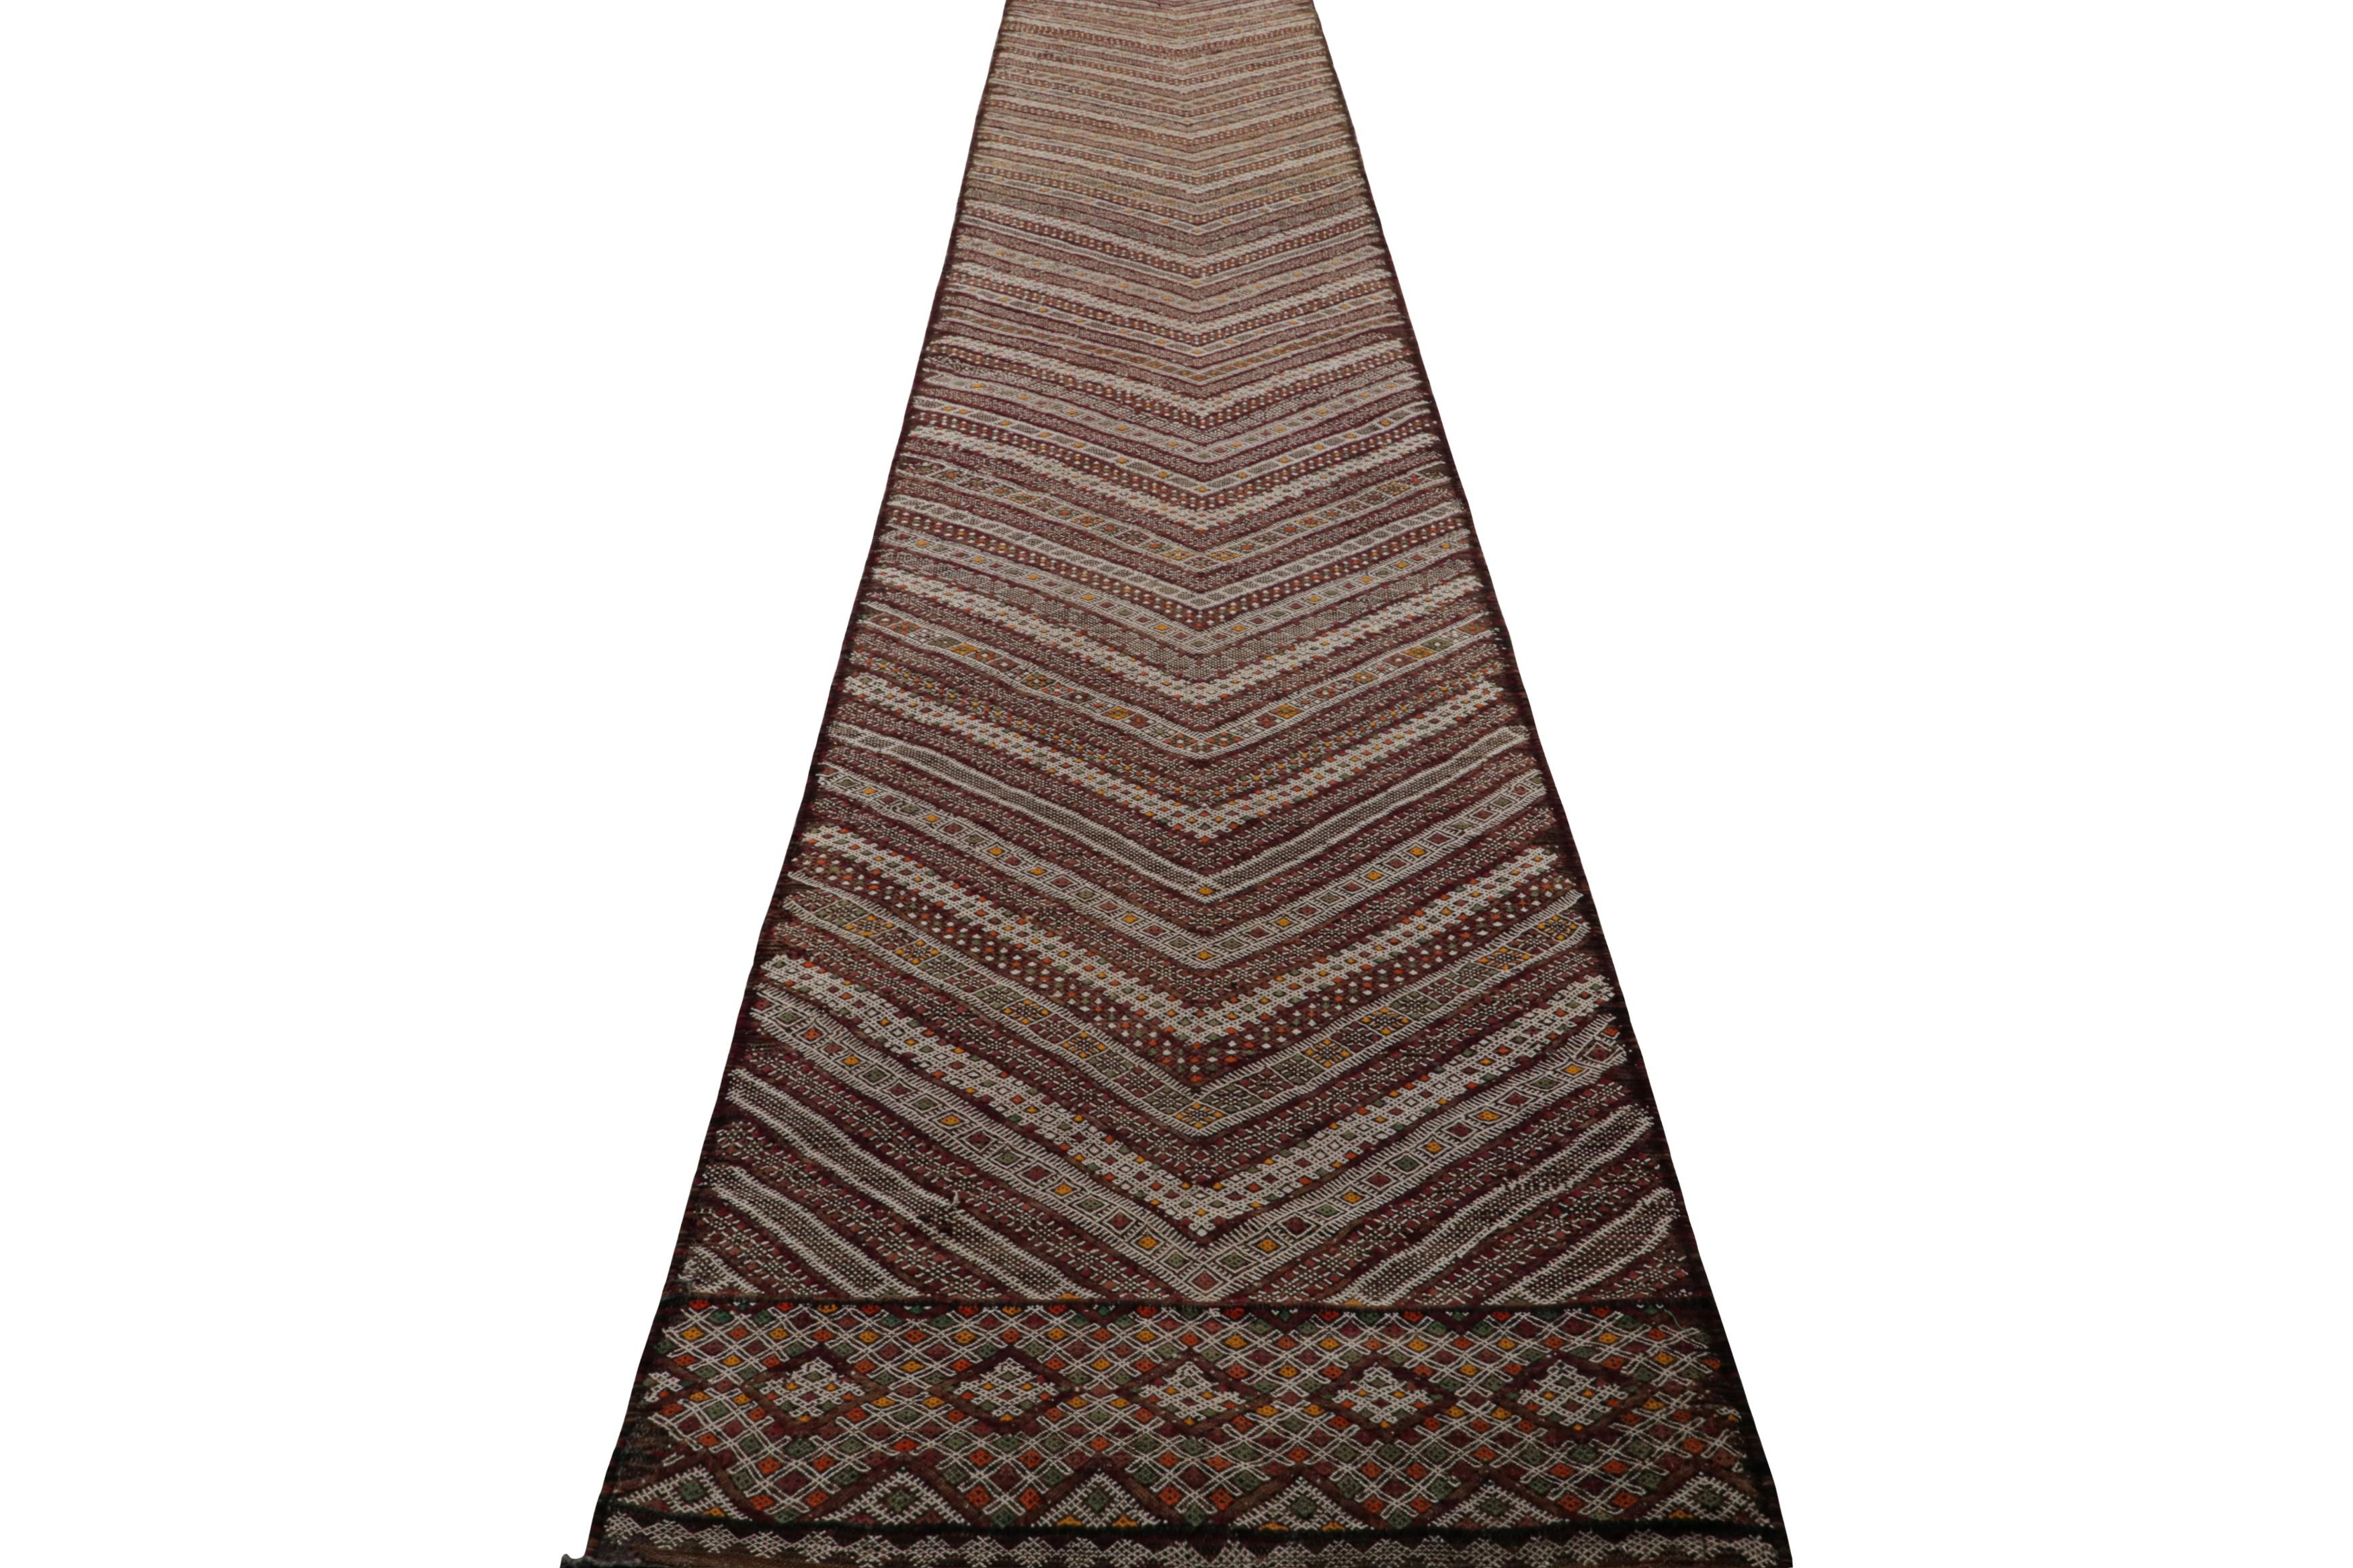 Tribal Vintage Zayane Moroccan Kilim and extra-long Runner Rug, from Rug & Kilim For Sale